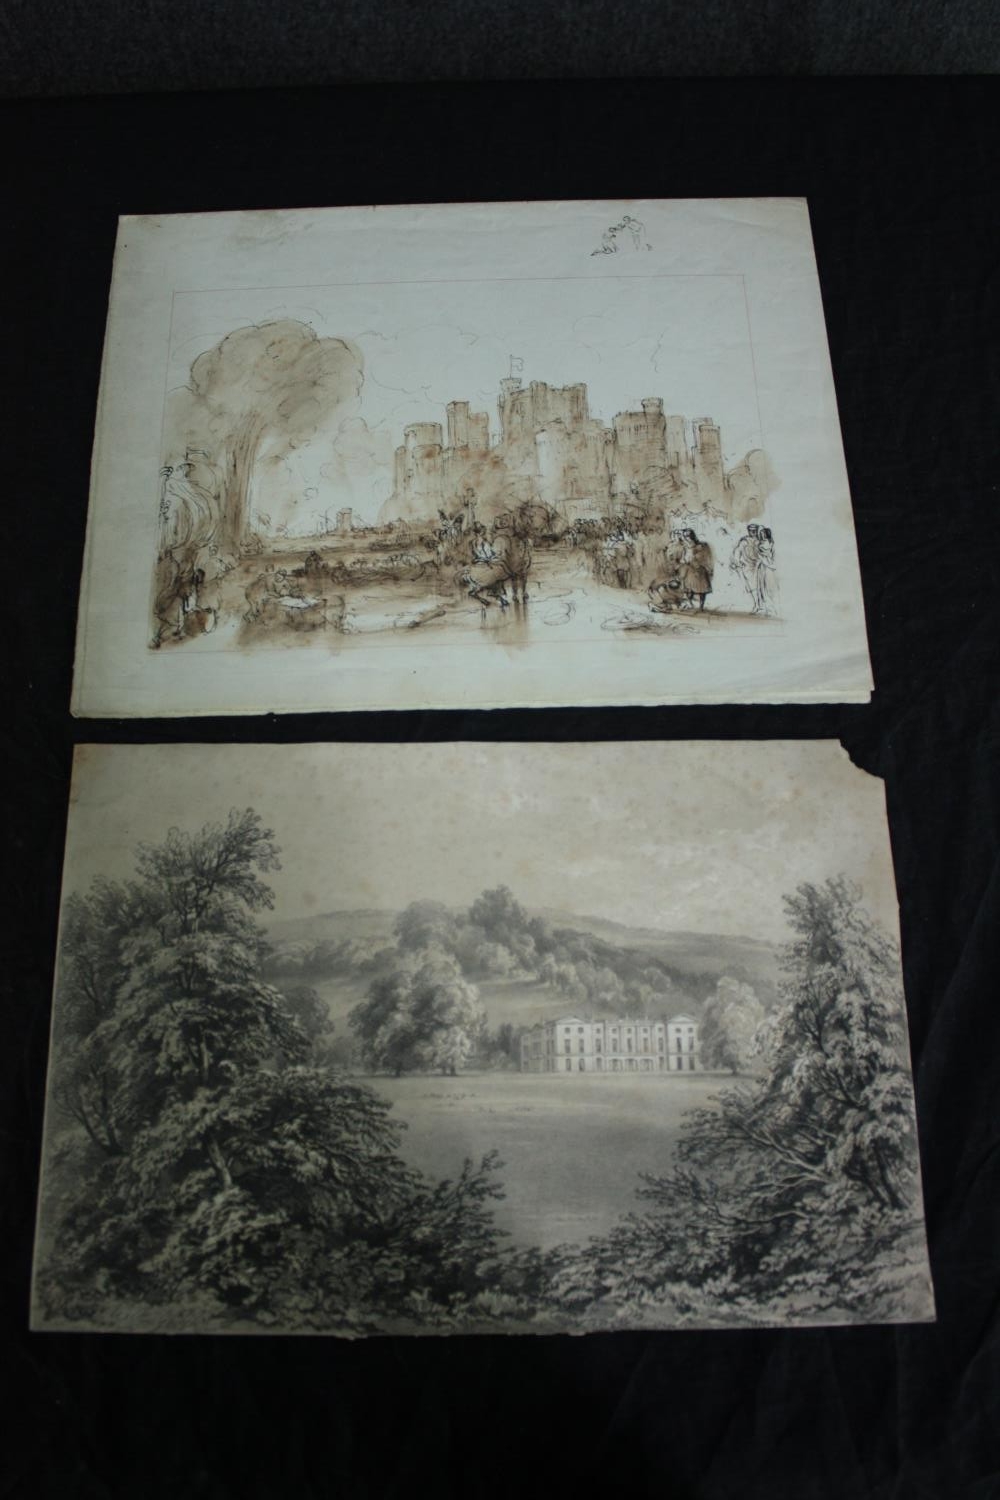 Two nineteenth century drawings. An ink wash castle scene and a well finished ink and pencil